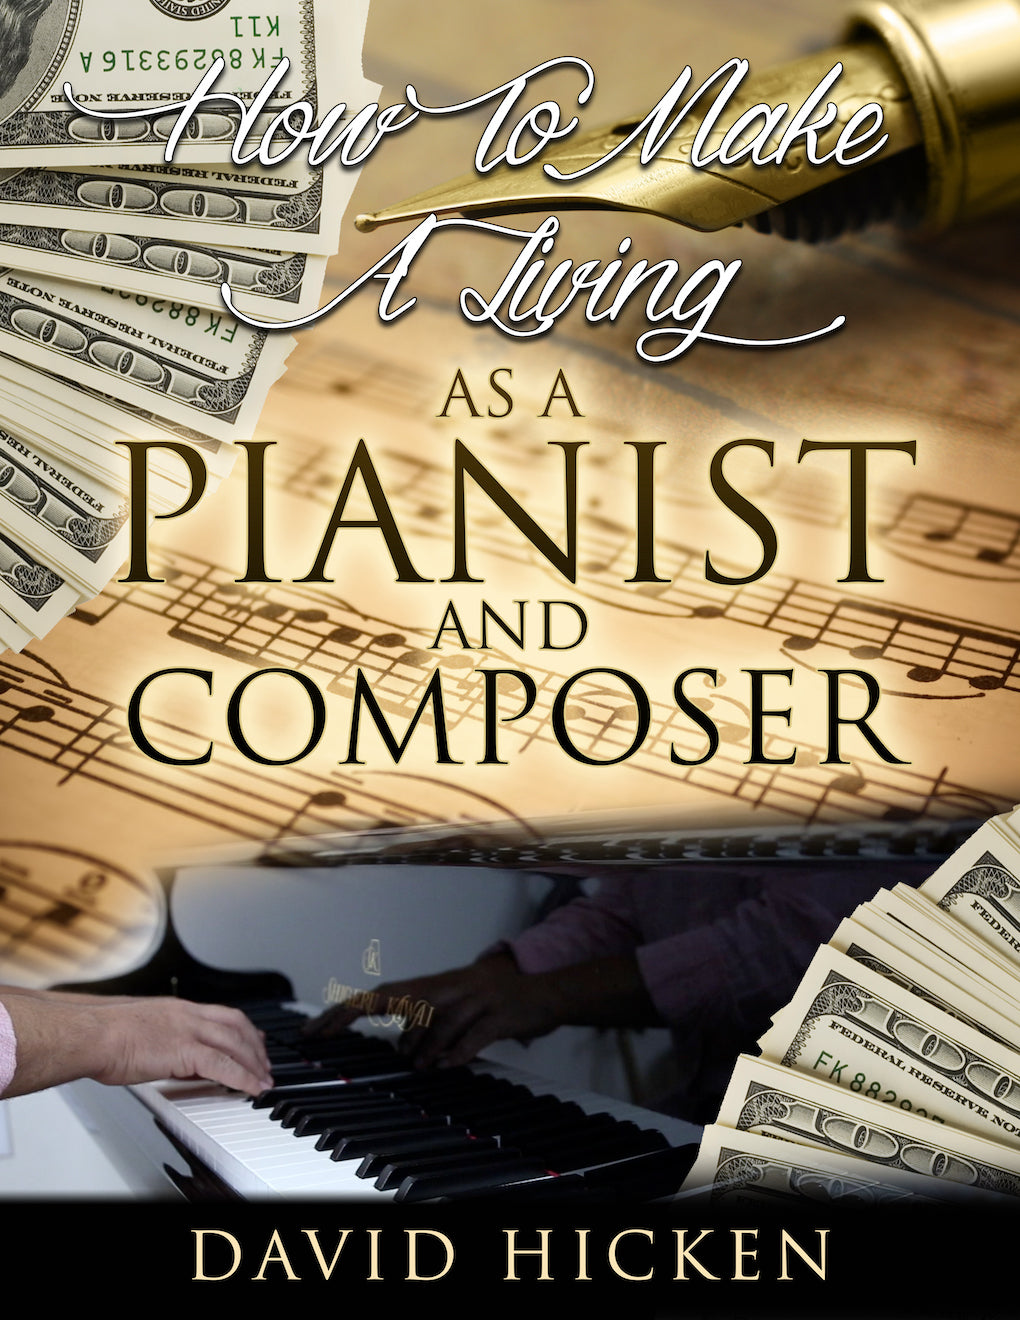 How To Make A Living As A Pianist and Composer Book by David Hicken